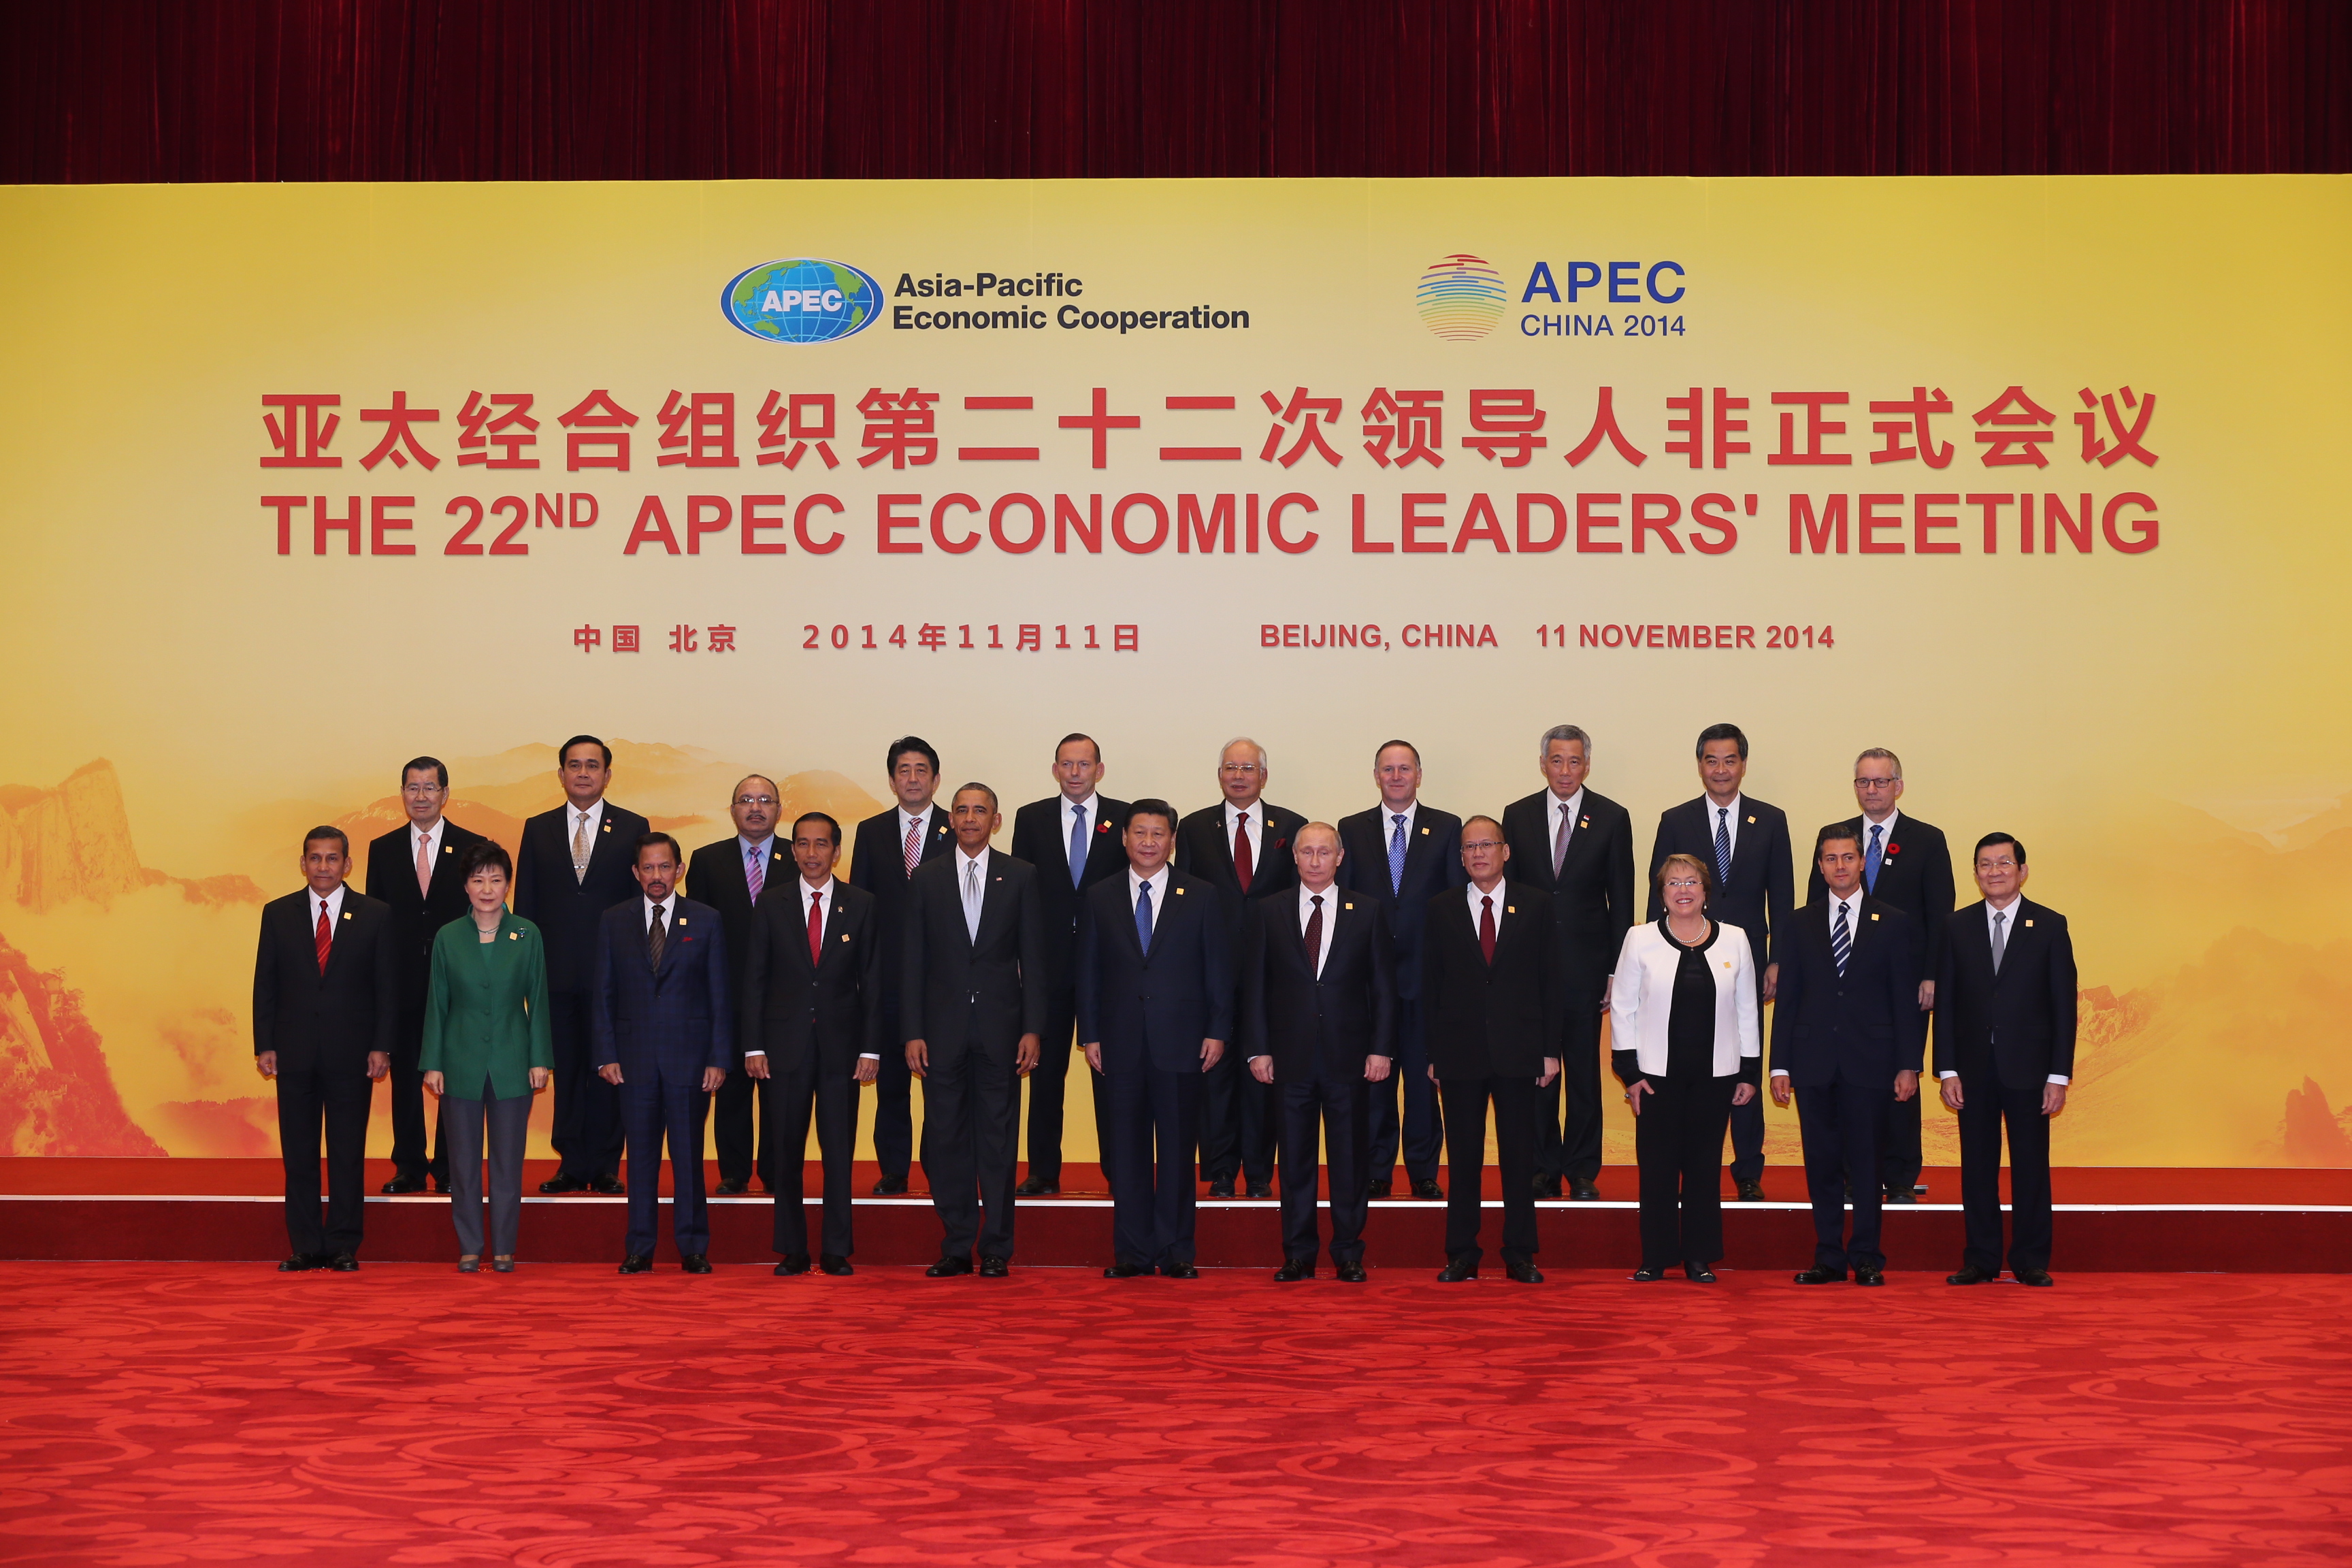 Prime Minister Lee Hsien Loong at the 22nd Asia-Pacific Economic Cooperation (APEC) Economic Leaders’ Meeting (AELM) from 10 to 11 Nov 2014 in Beijing, China (MCI Photo by LH Goh) 